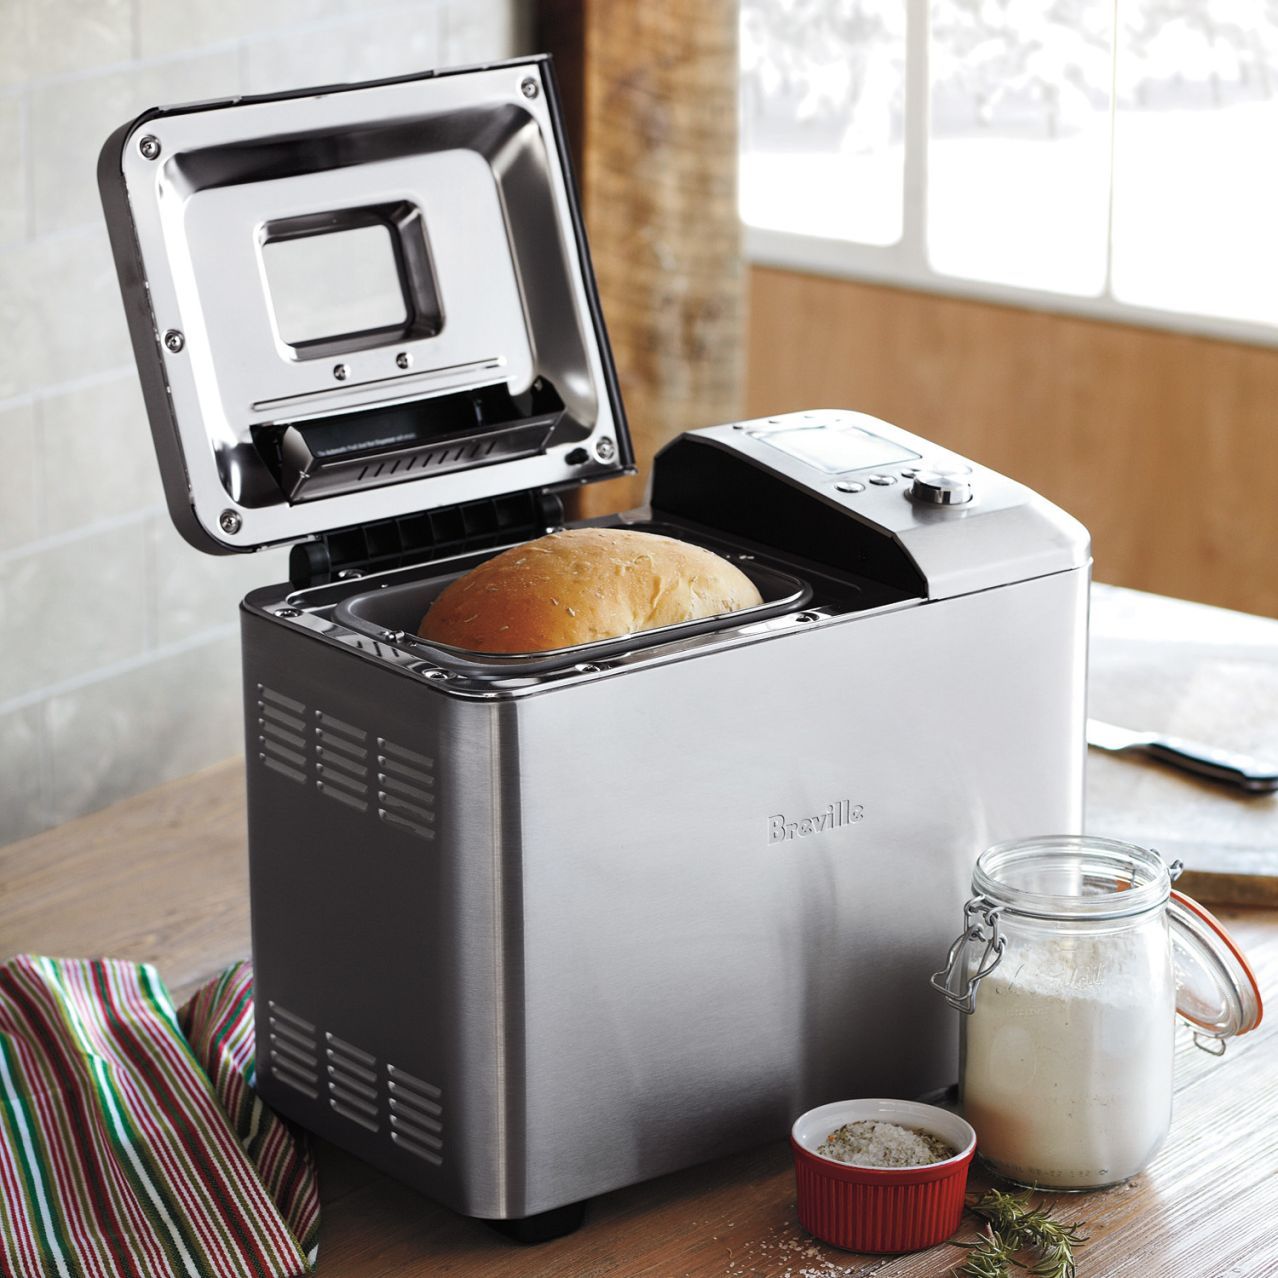 Customized Creations: Personalized Bread Making with the Breville BBM800XL Custom Loaf Bread Maker